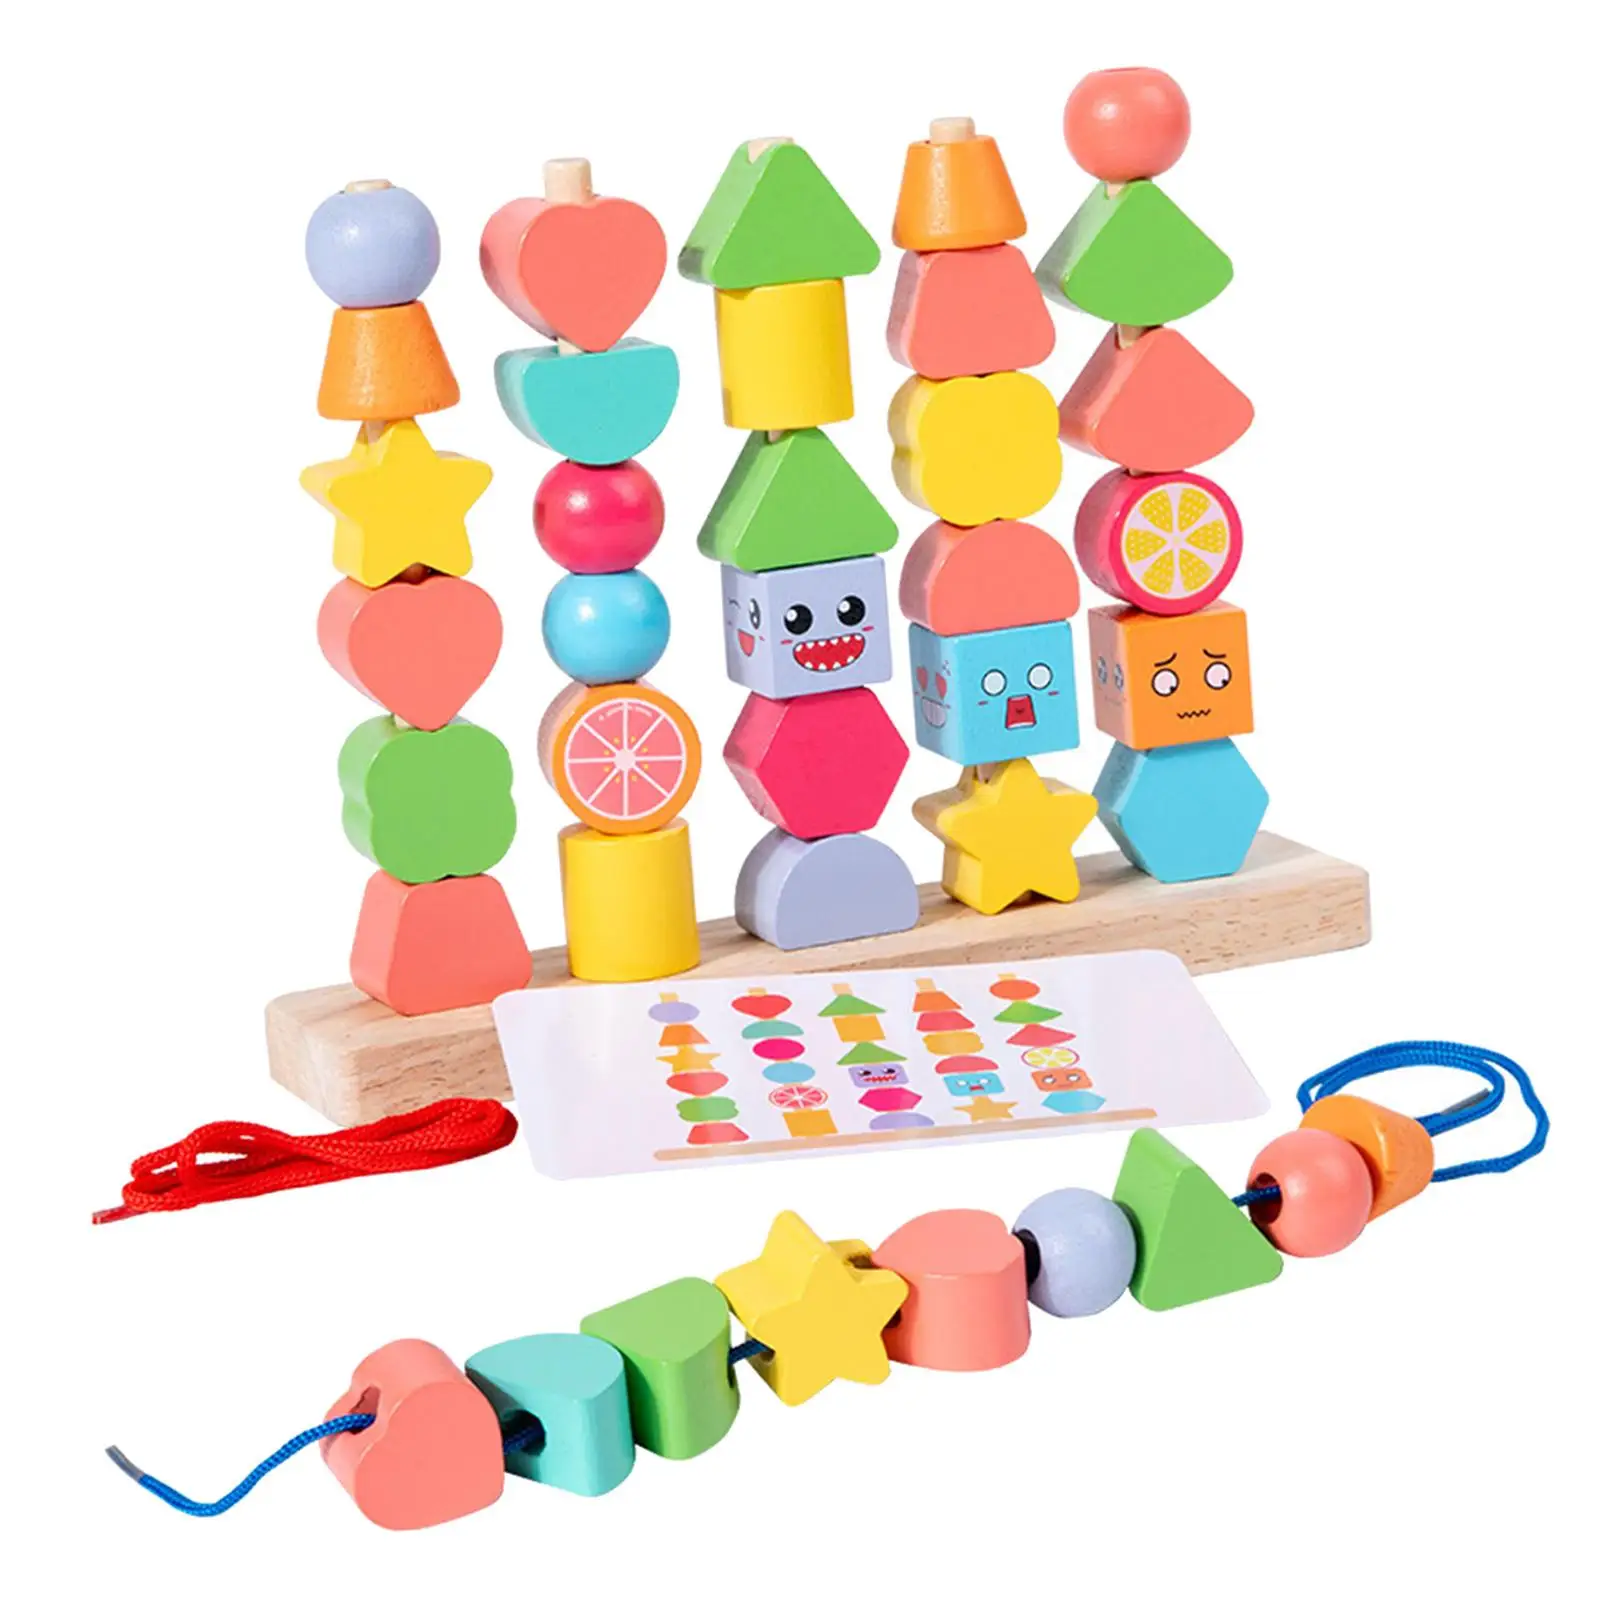 Montessori Threading Toys Matching Shapes Stacking Toy for Preschool